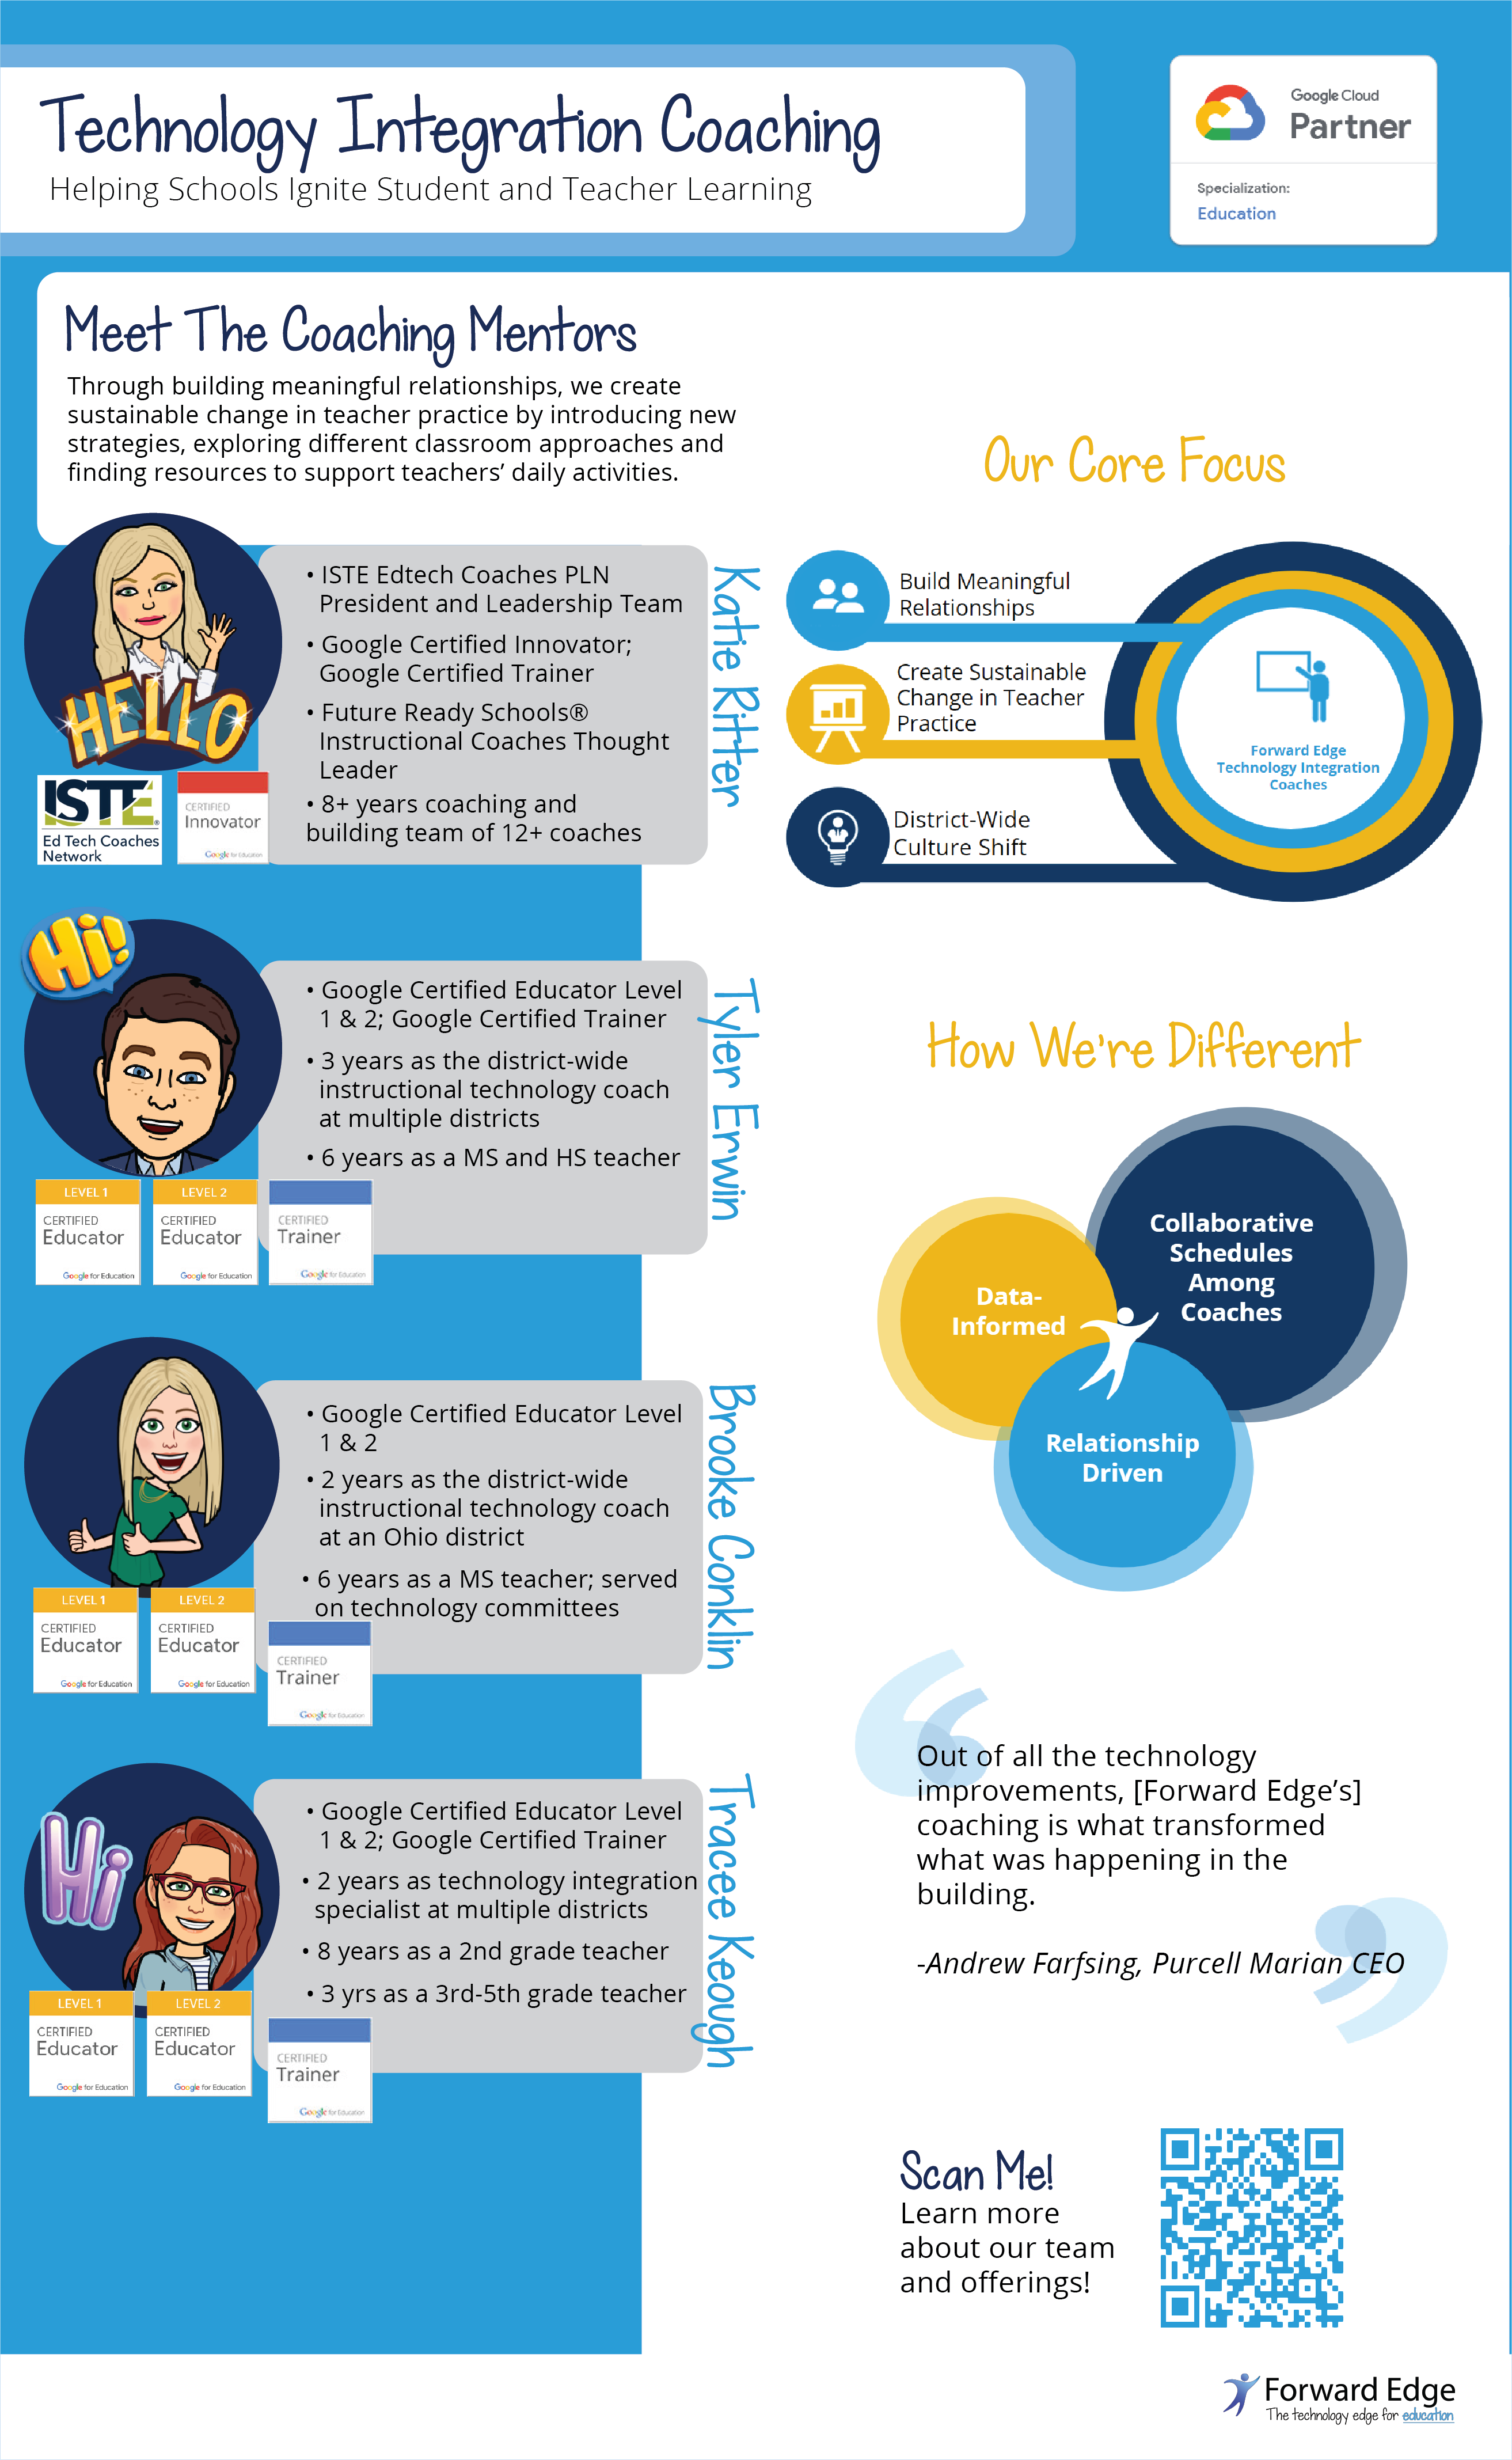 Image of Technology Integration Coaching Infographic